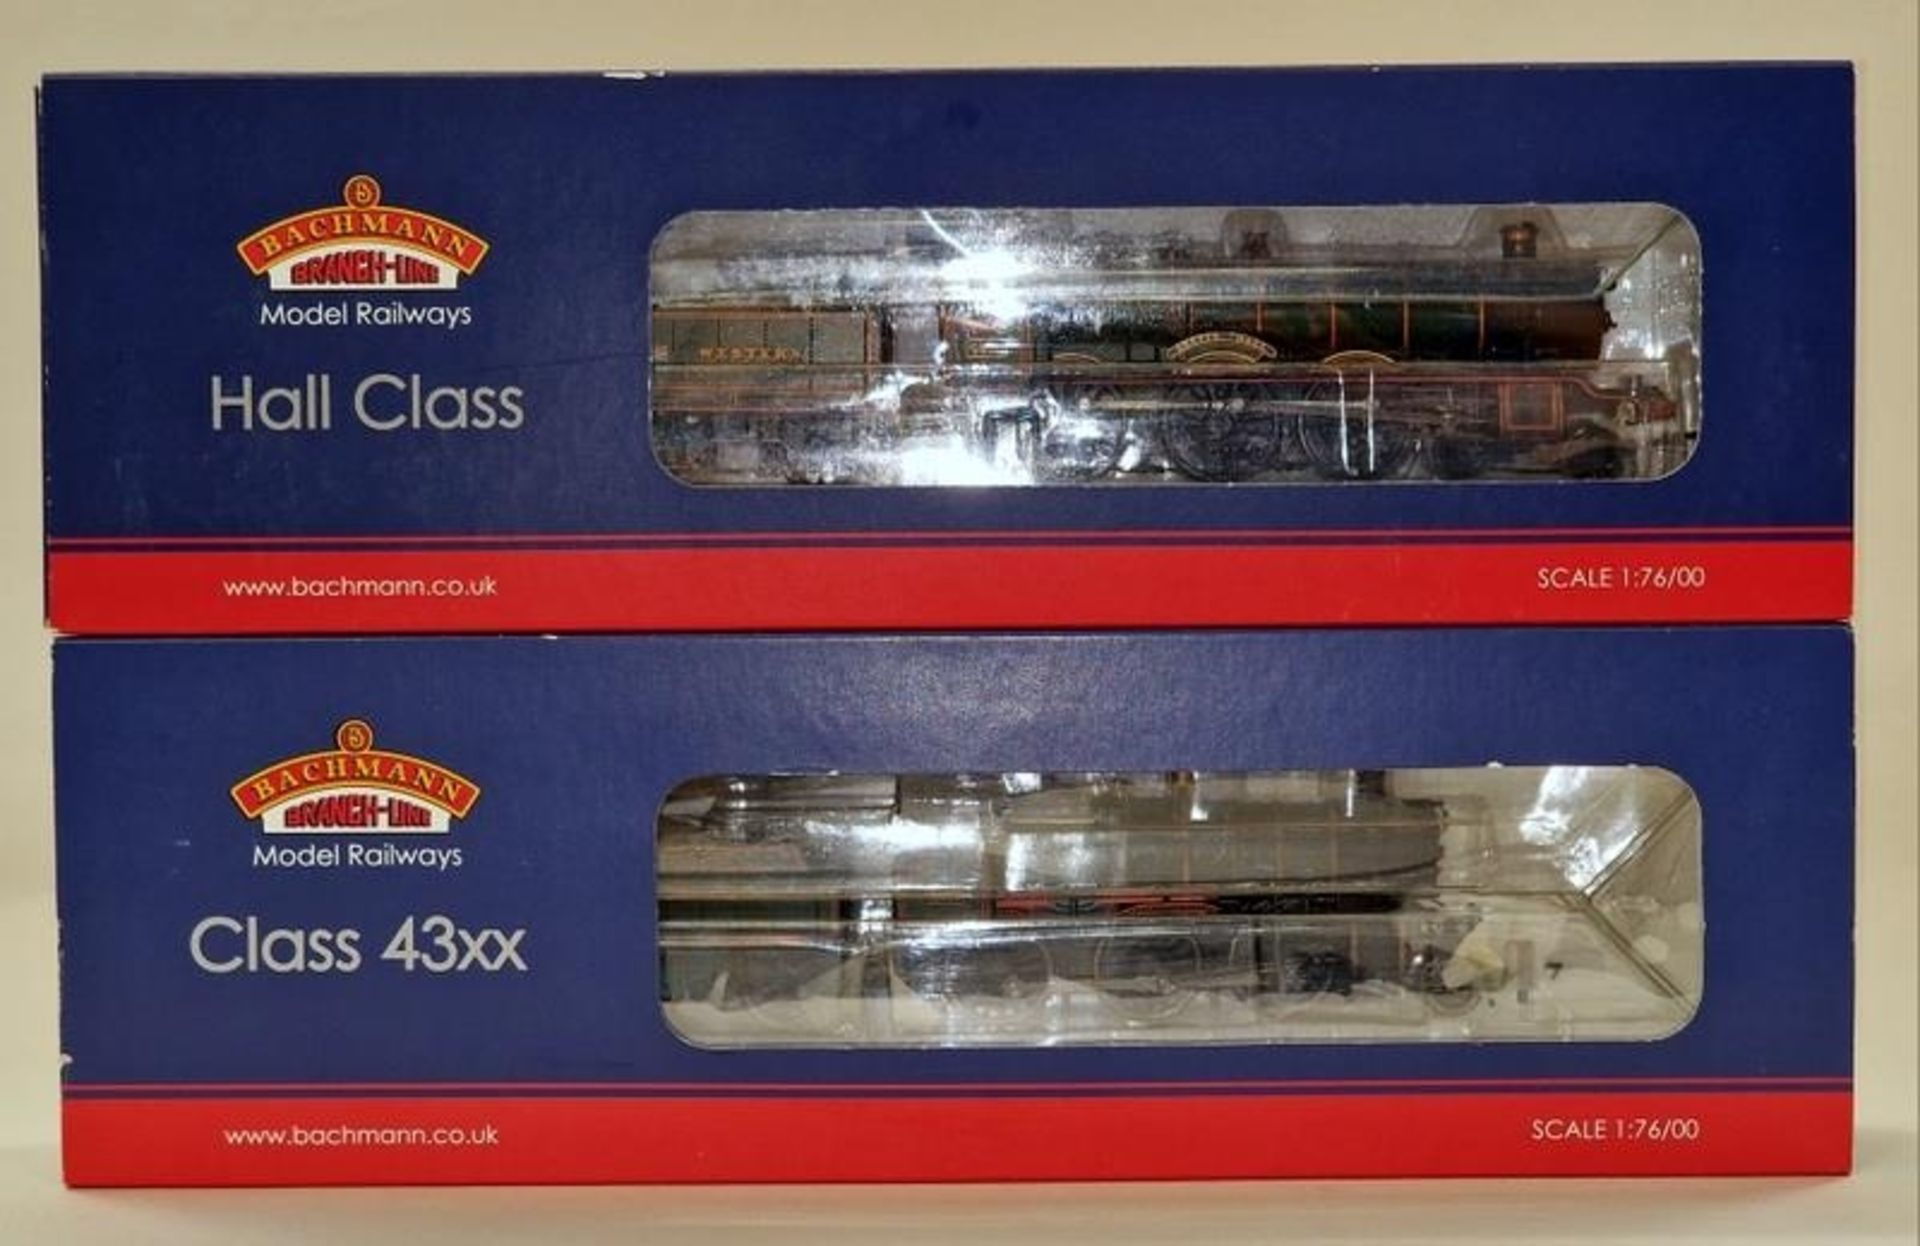 Bachmann 32-004 Hall Class 4970 locomotive together with 31-831 Class 43xx locomotive. Both in